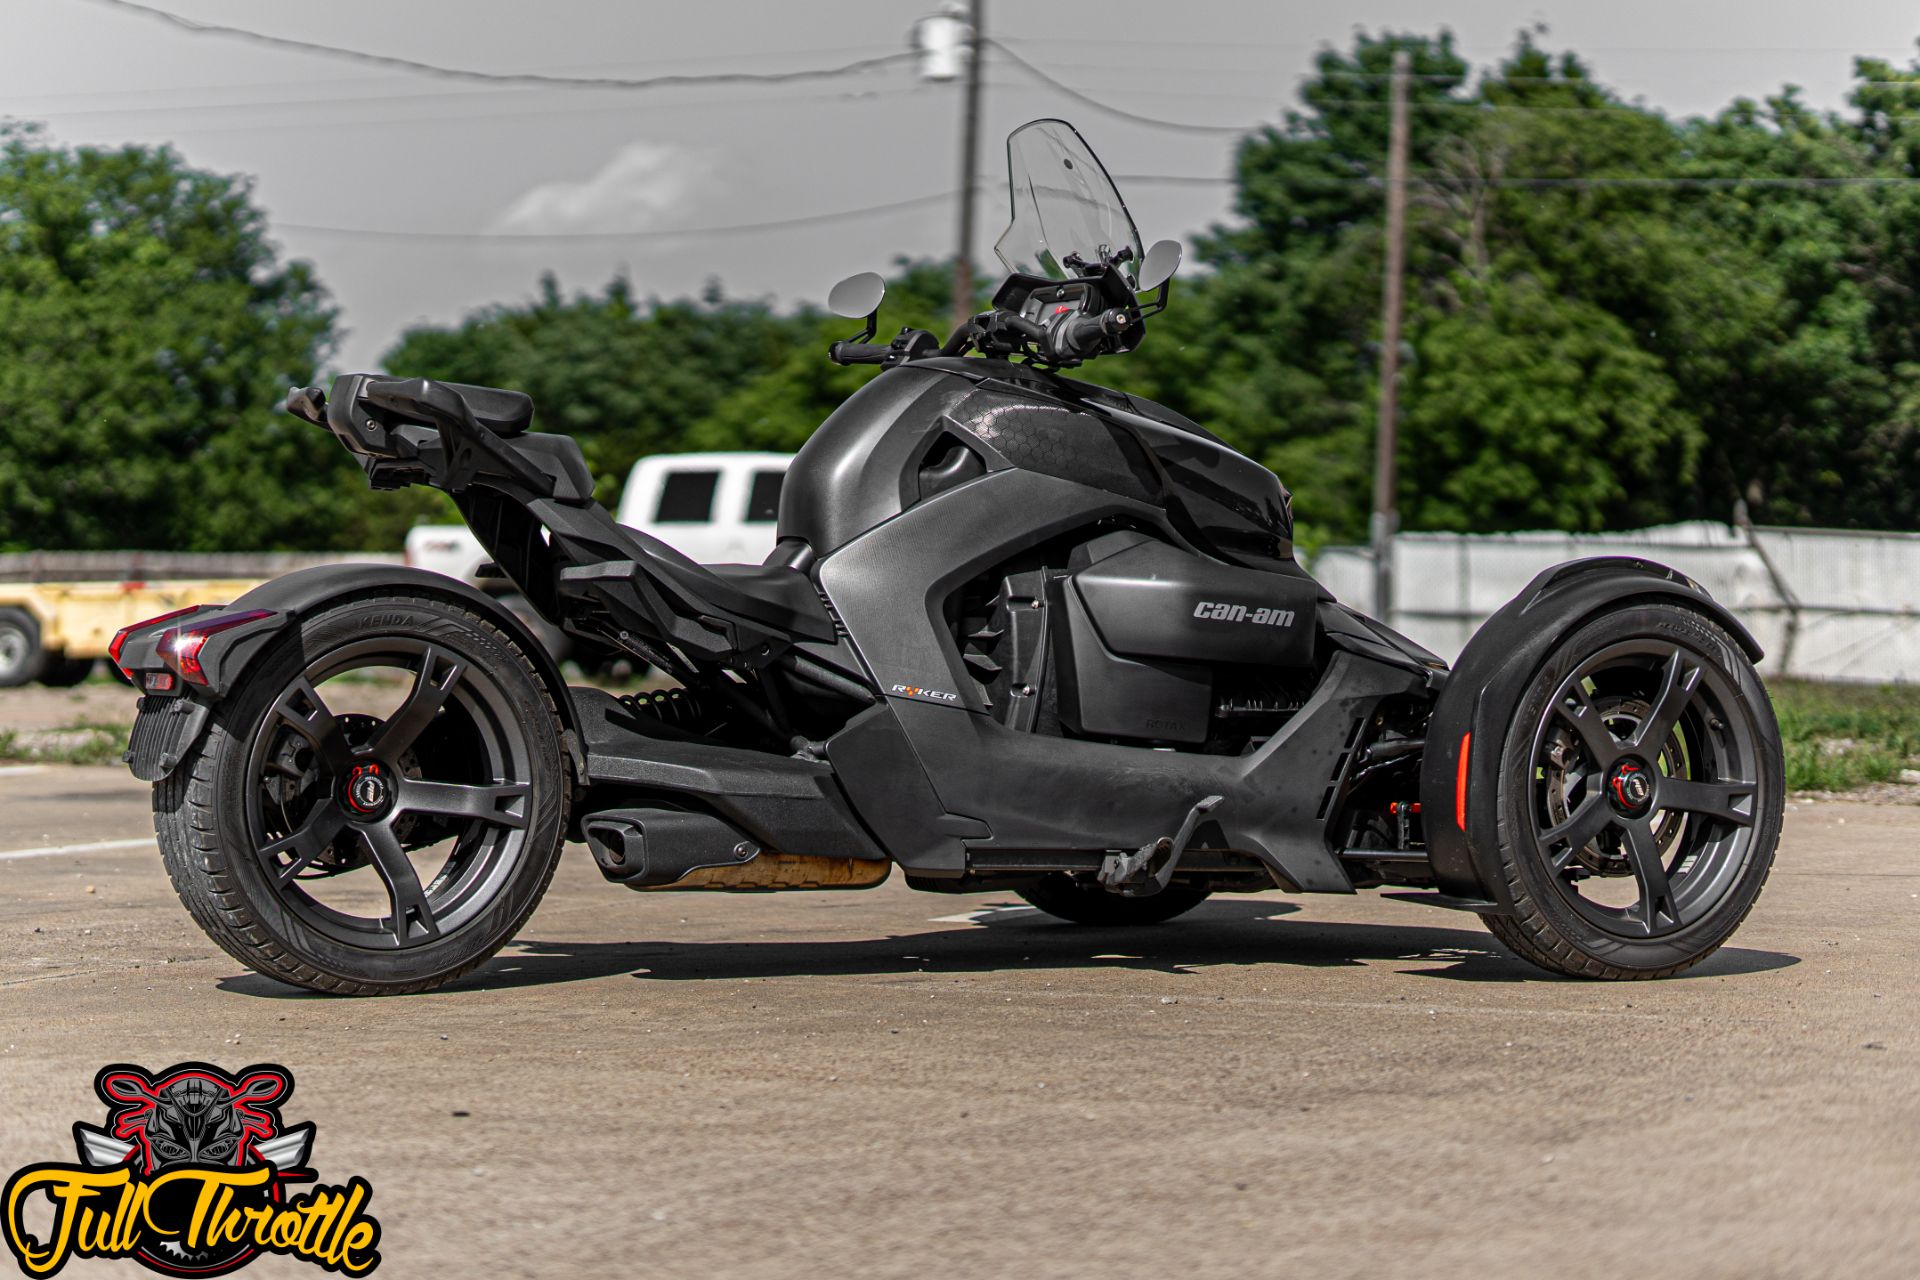 2019 Can-Am RYKER 900 ACE in Lancaster, Texas - Photo 3